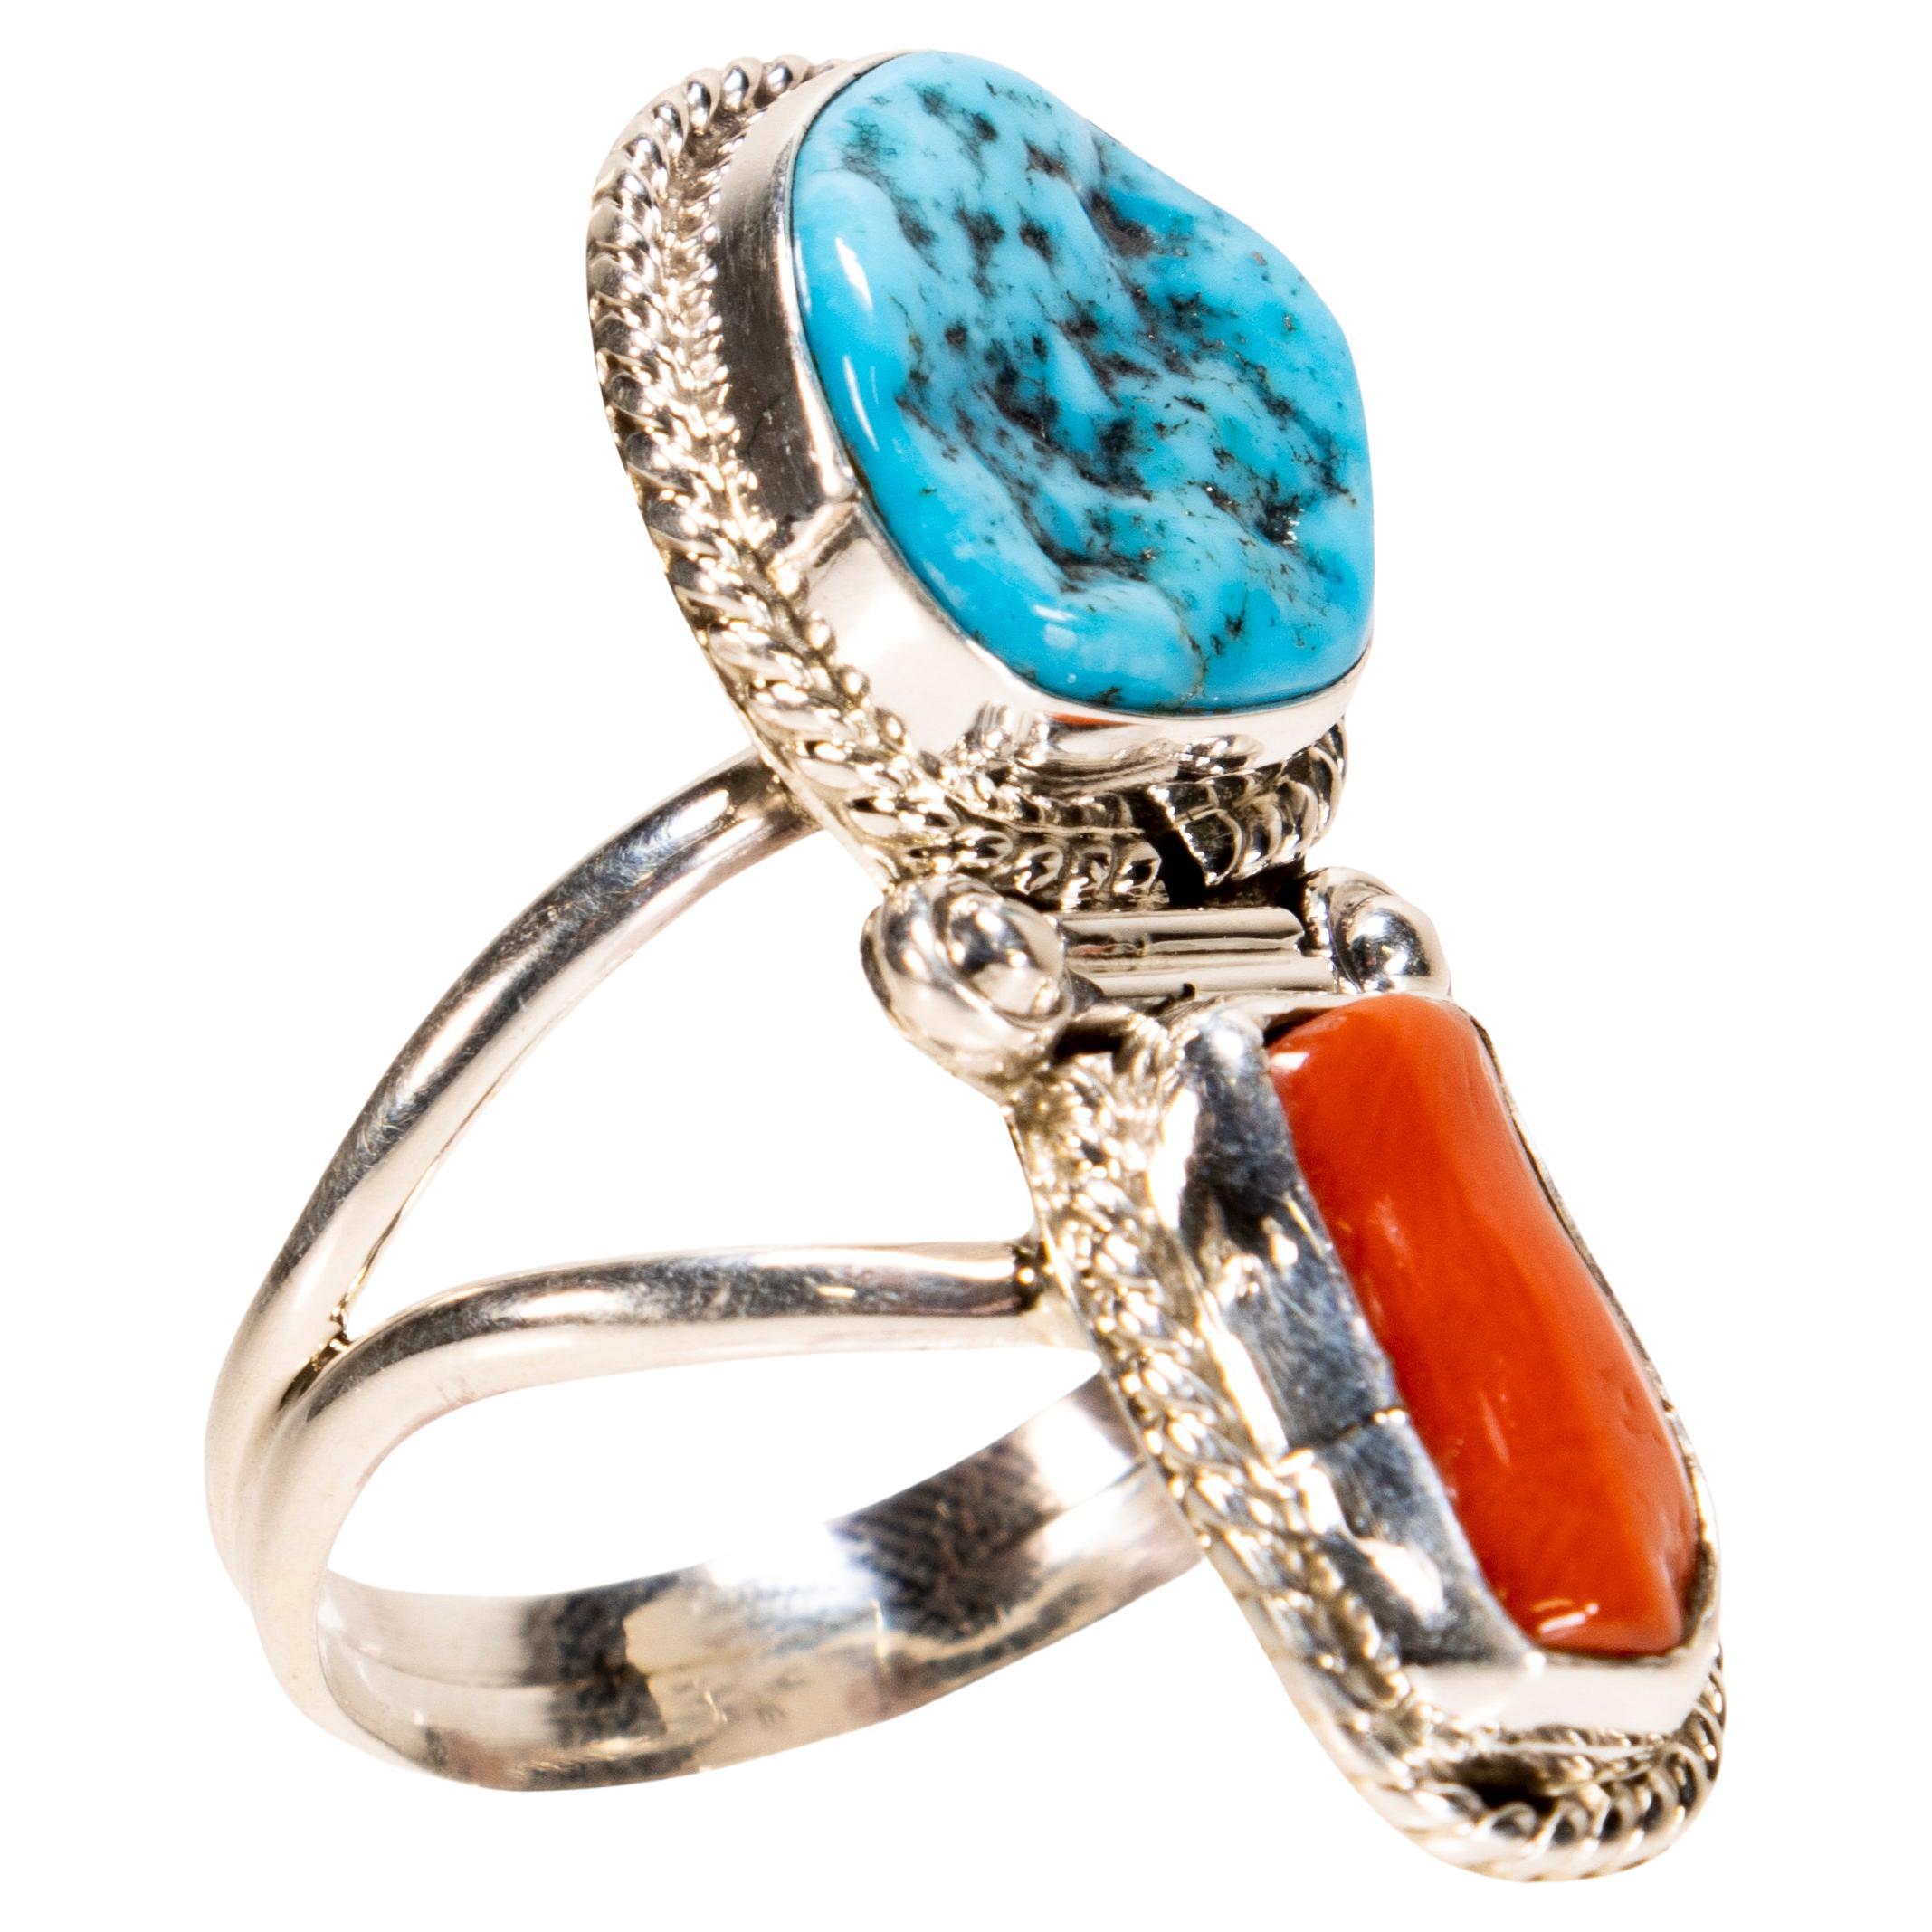 What is a Navajo ring?